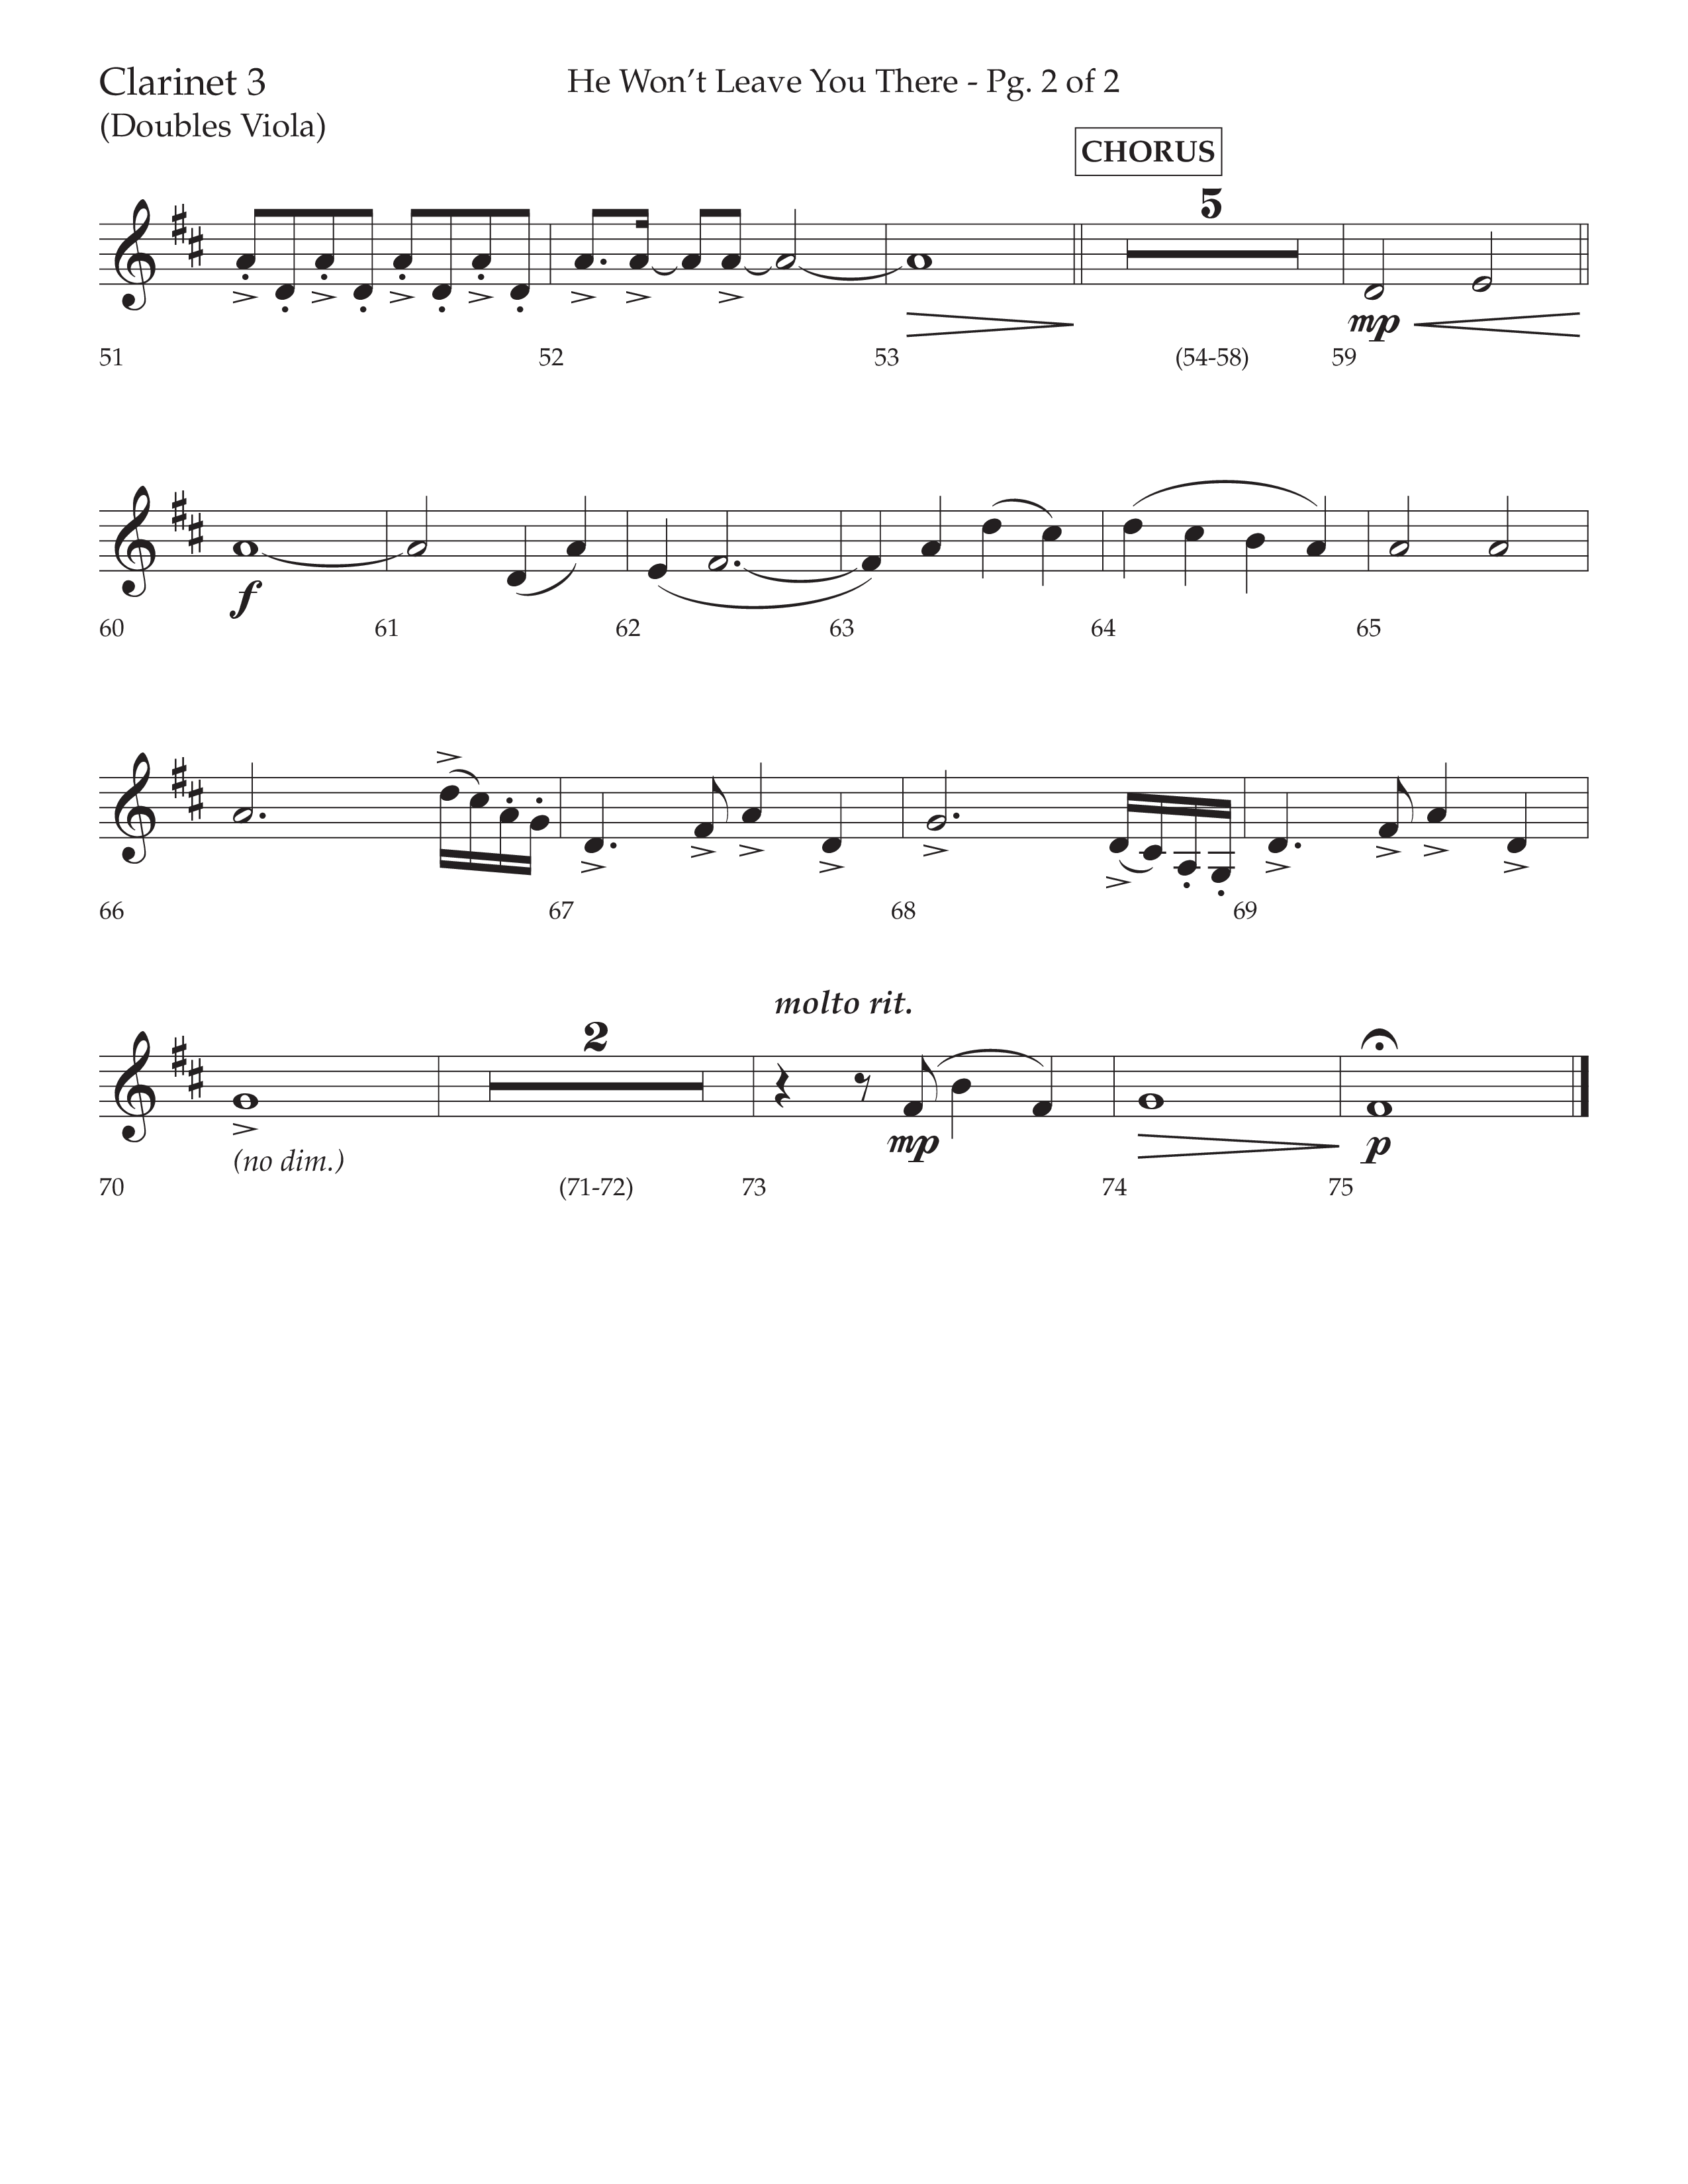 He Won't Leave You There (Choral Anthem SATB) Clarinet 3 (Lifeway Choral / Arr. David Wise / Orch. David Shipps)